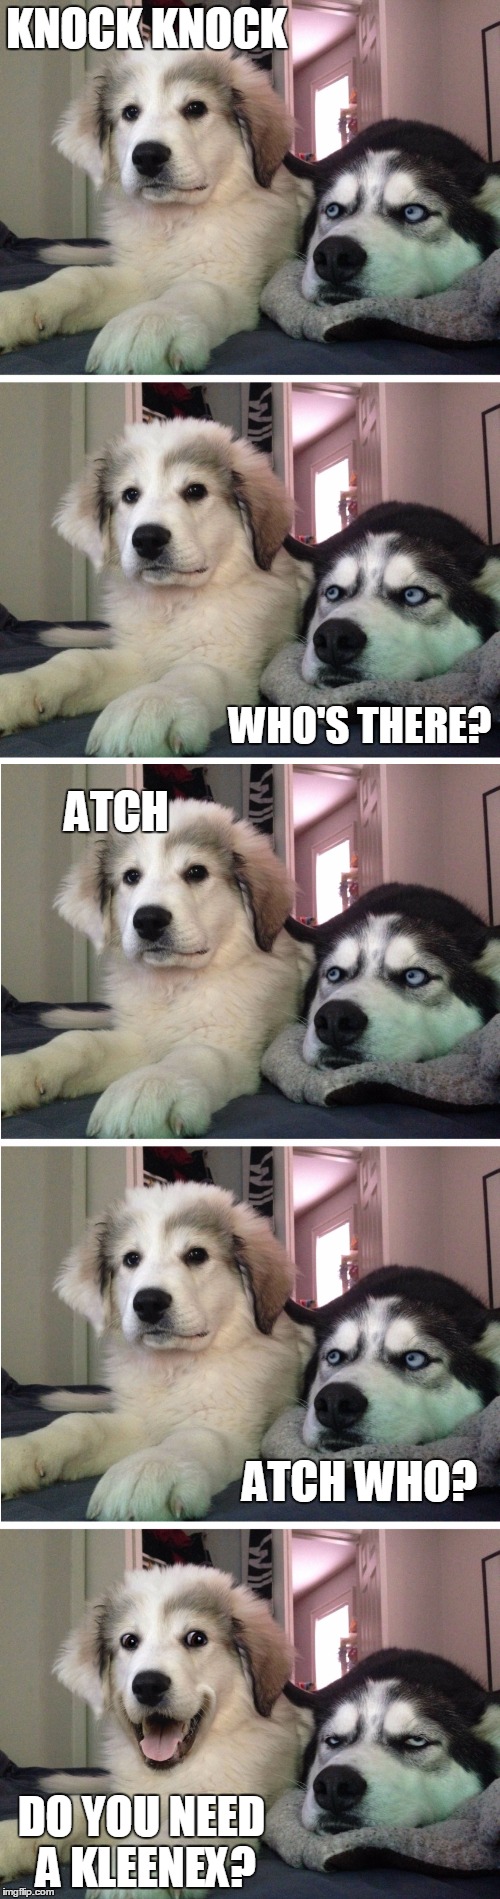 Knock Knock Dogs | KNOCK KNOCK; WHO'S THERE? ATCH; ATCH WHO? DO YOU NEED A KLEENEX? | image tagged in knock knock,bad joke dogs,meme,funny,sneeze | made w/ Imgflip meme maker